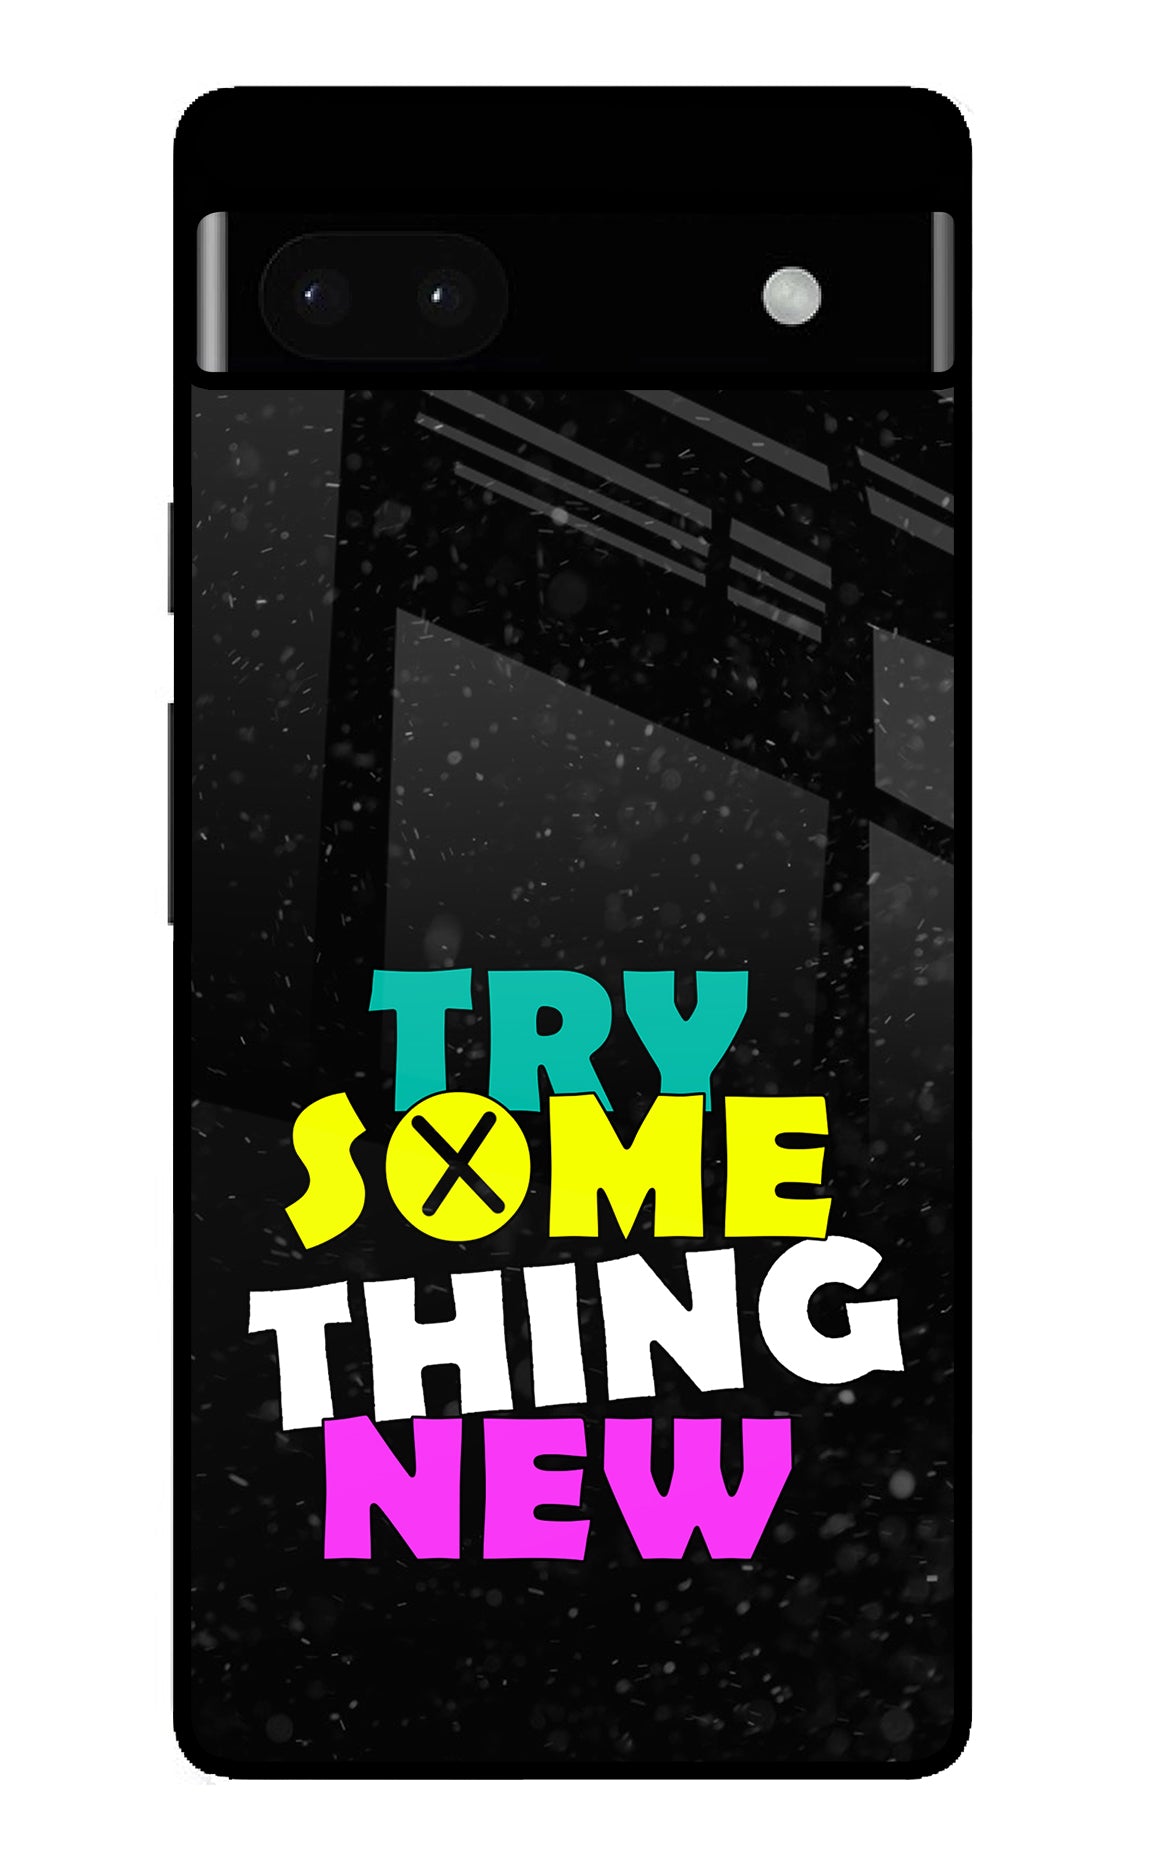 Try Something New Google Pixel 6A Back Cover